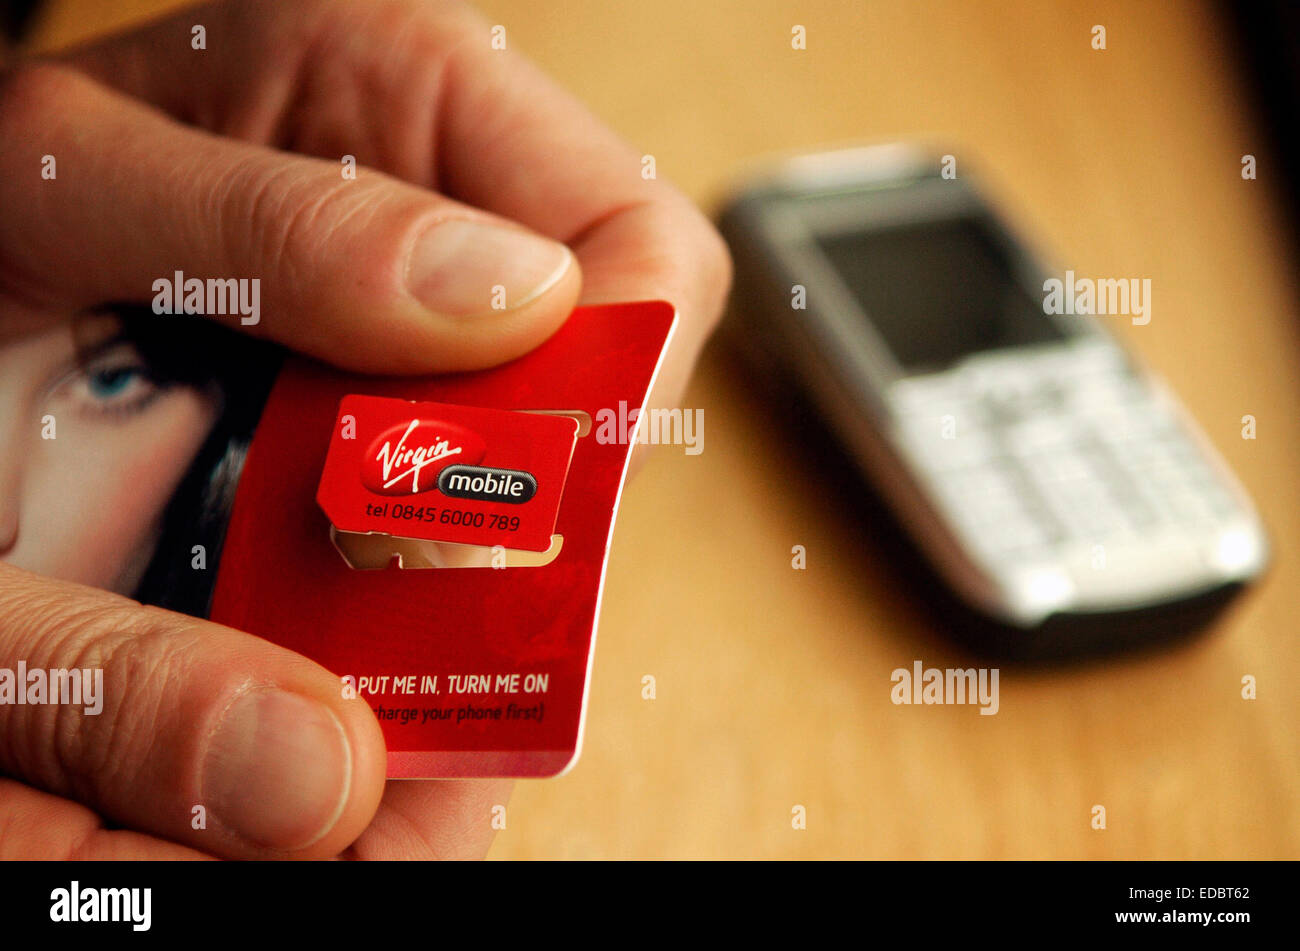 Virgin Media Phone Numbers - How to get in touch